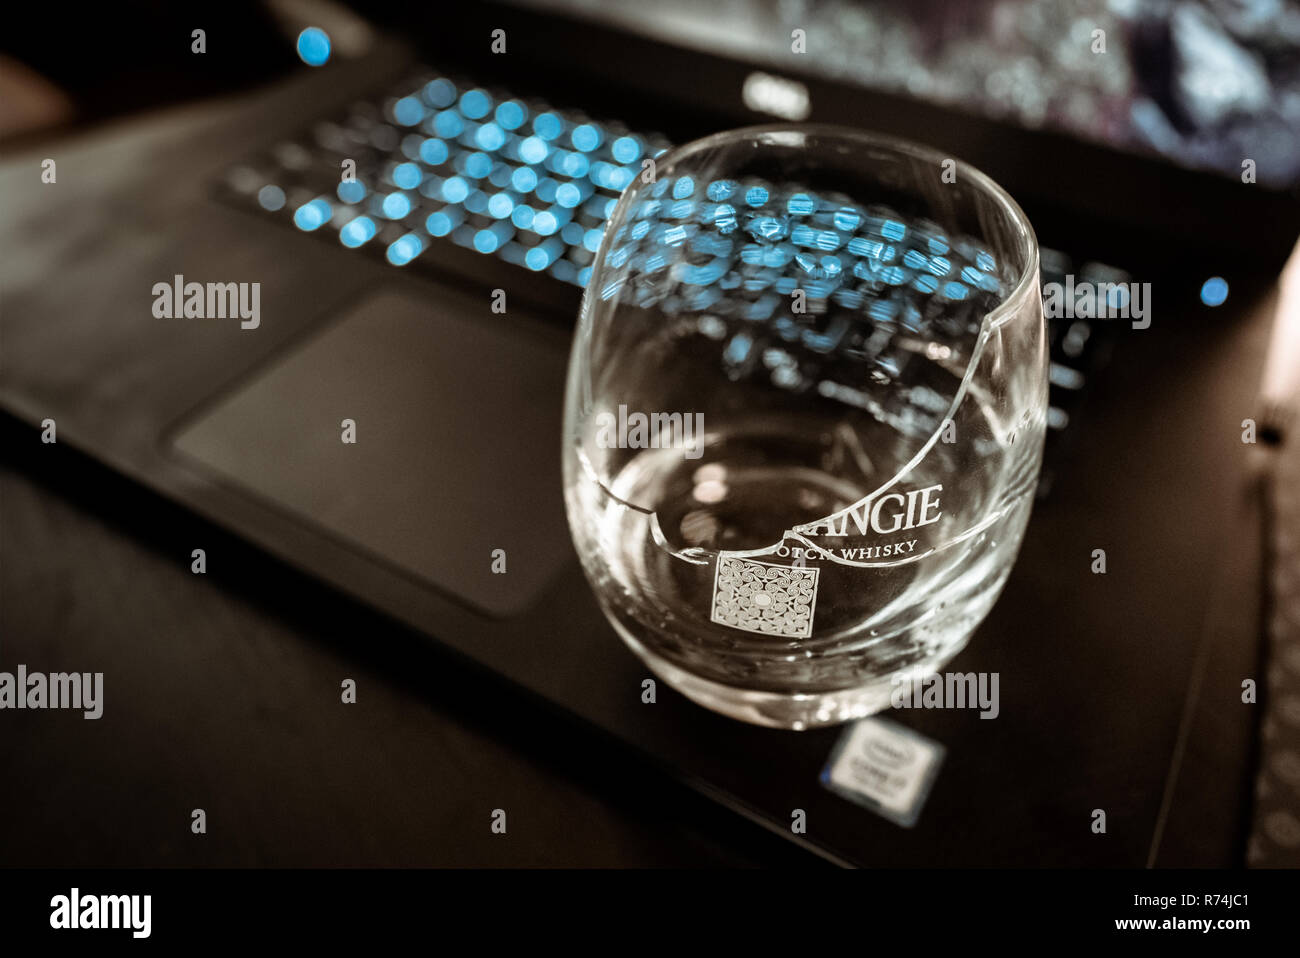 Shattered whisky glass on a laptop Stock Photo